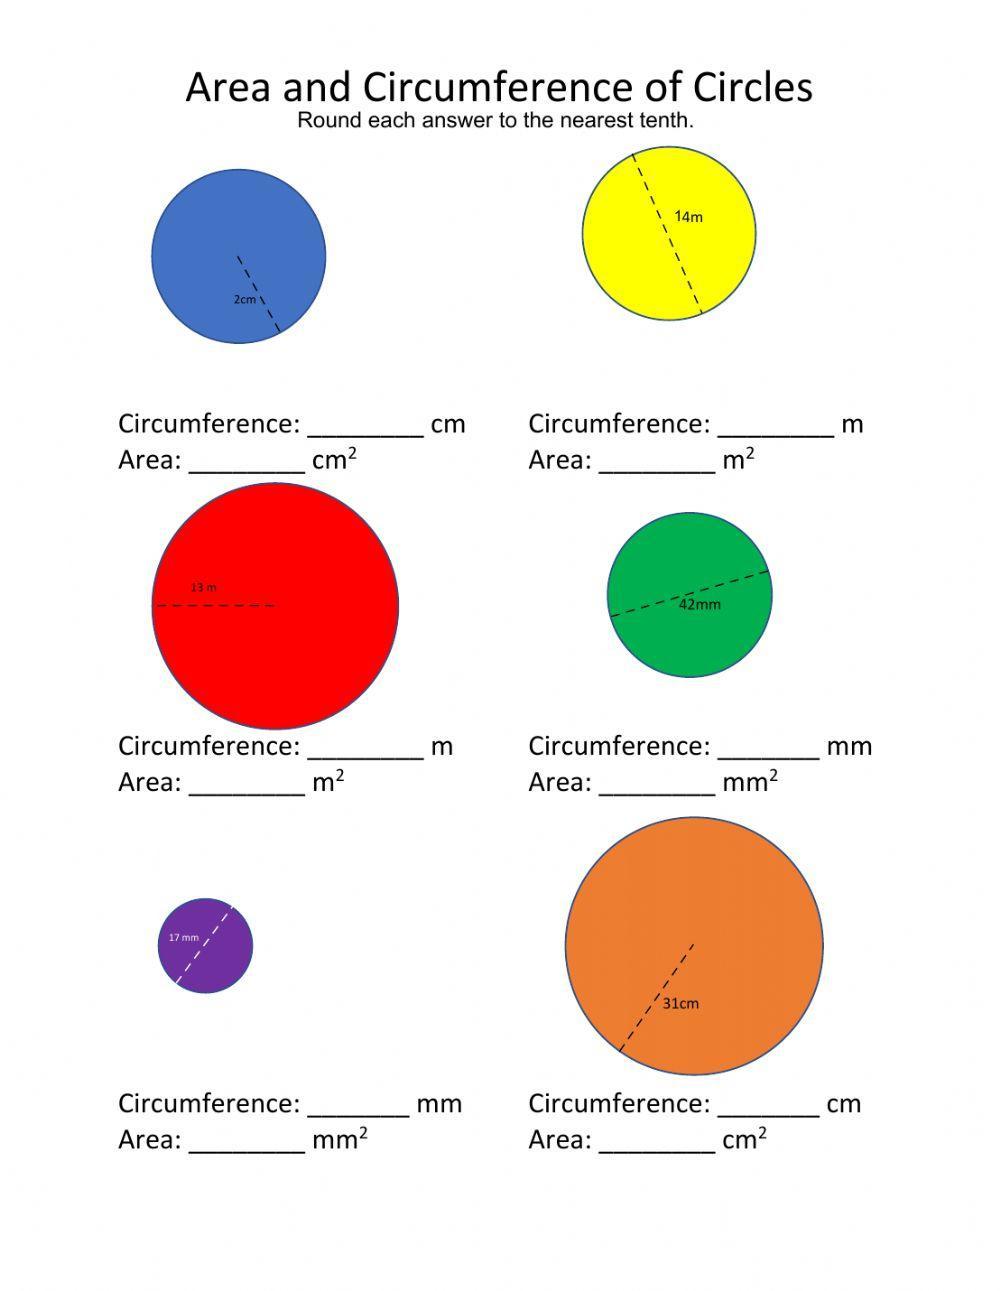 Area and Circumference